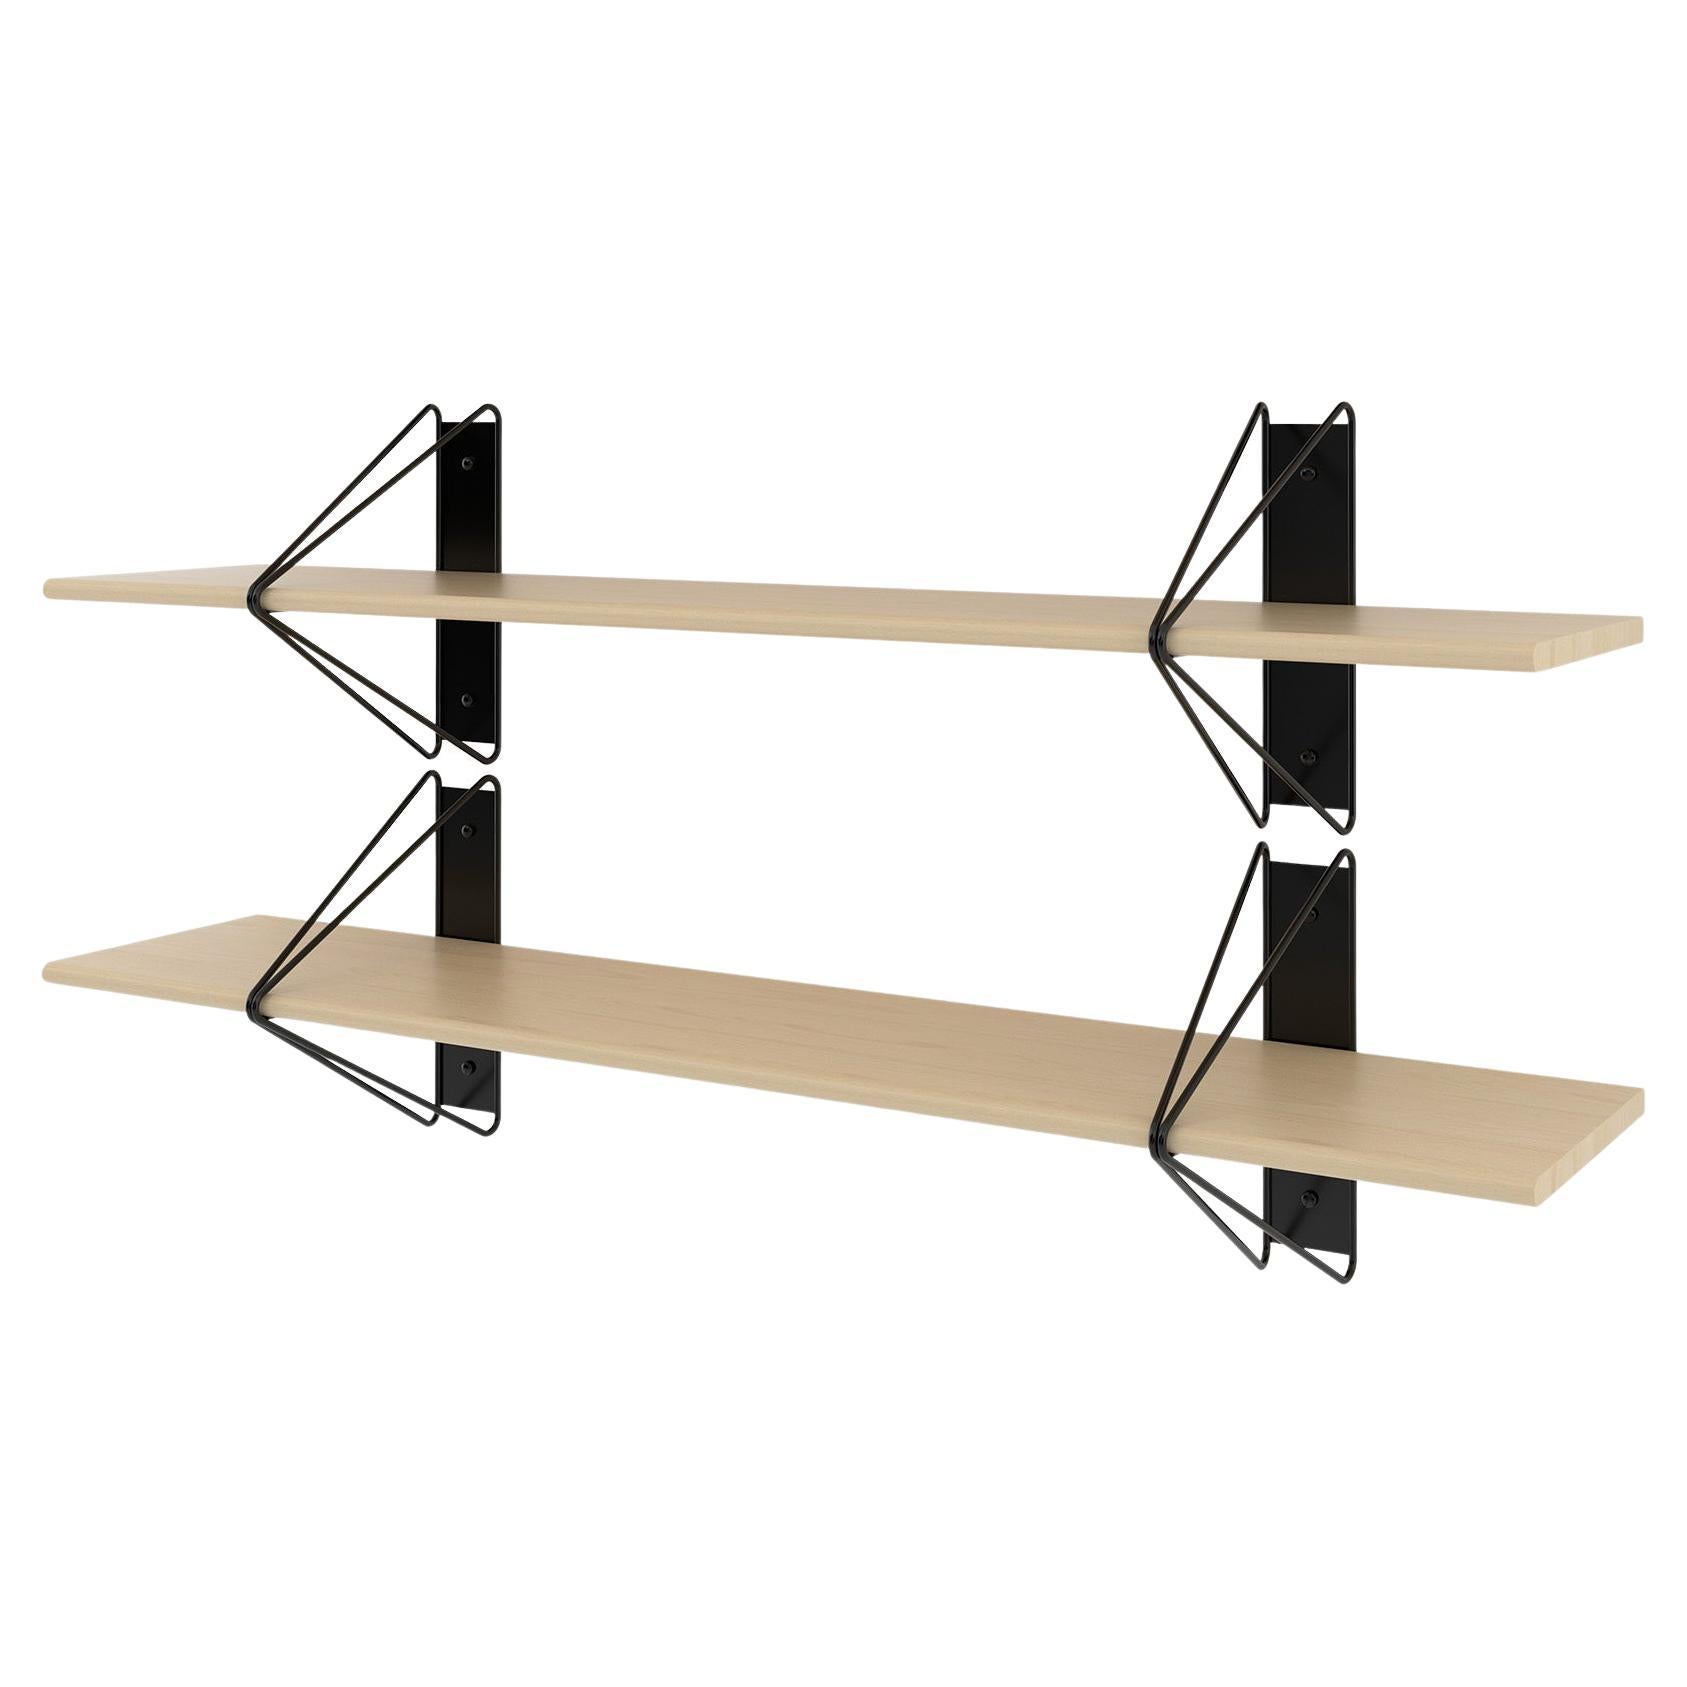 Set of 2 Strut Shelves from Souda, Black and Maple, Made to Order For Sale